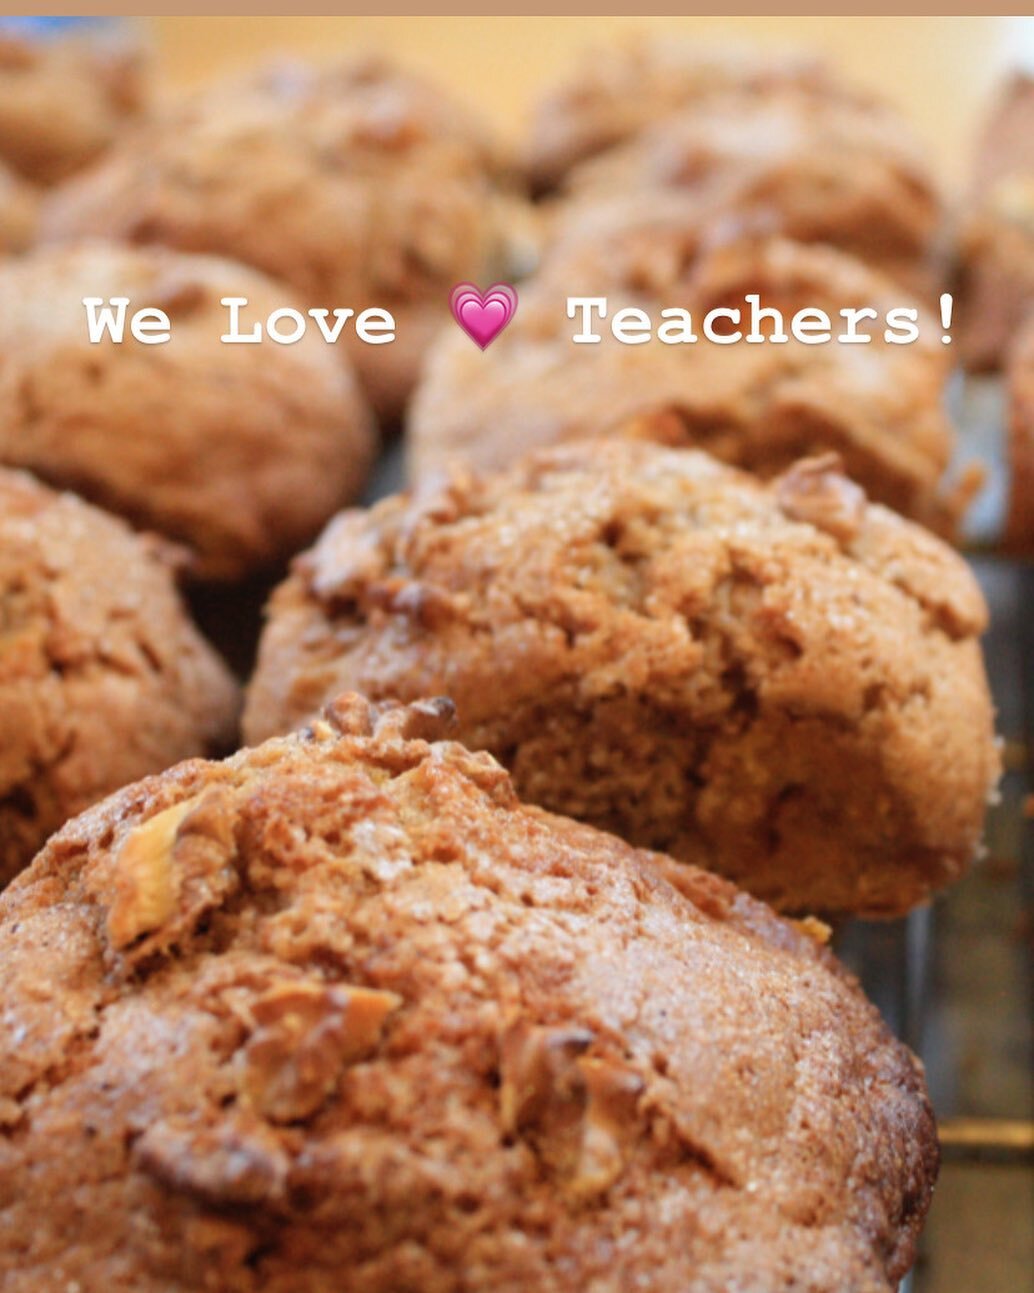 We appreciate all of the work our teachers do for our community. 

To celebrate your talent and dedication, we are offering educators 10% off of your purchase at this week&rsquo;s Markets. 

Visit Us

Thursday, 3 &ndash; 7 pm @Salemmafarmersmarket
De